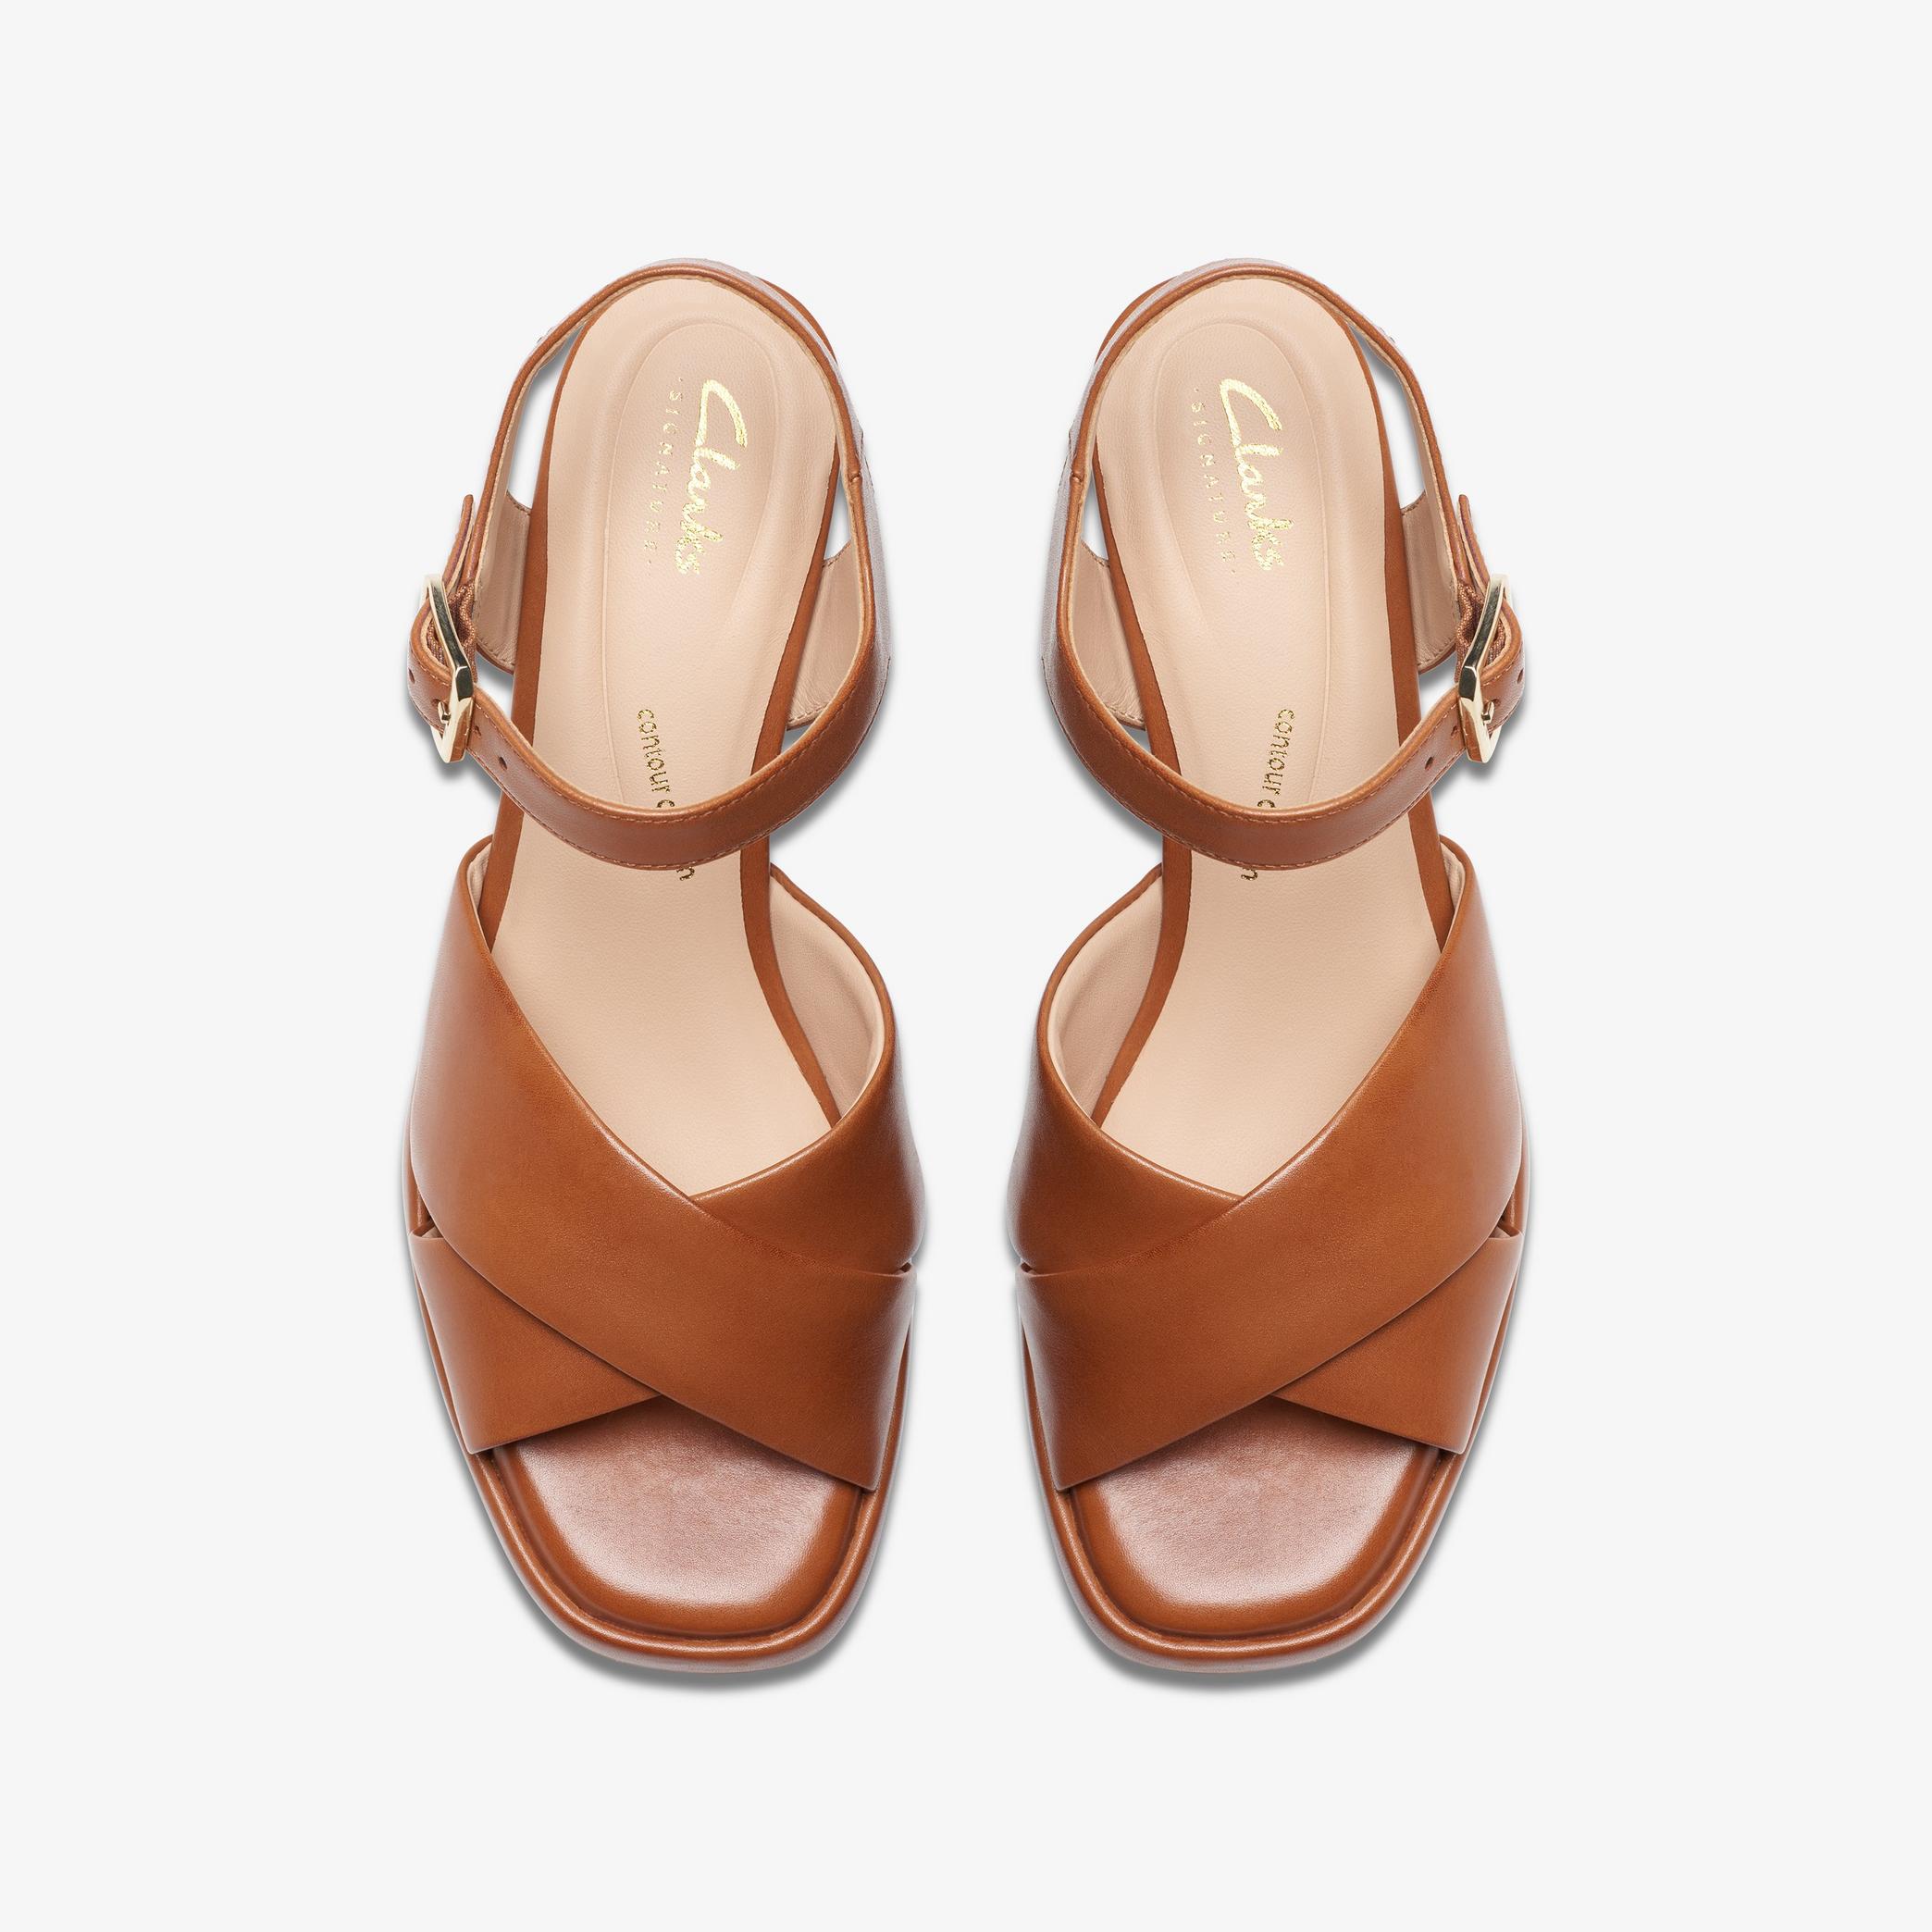 Ritzy 75 Rae Tan Leather Heeled Sandals, view 11 of 11